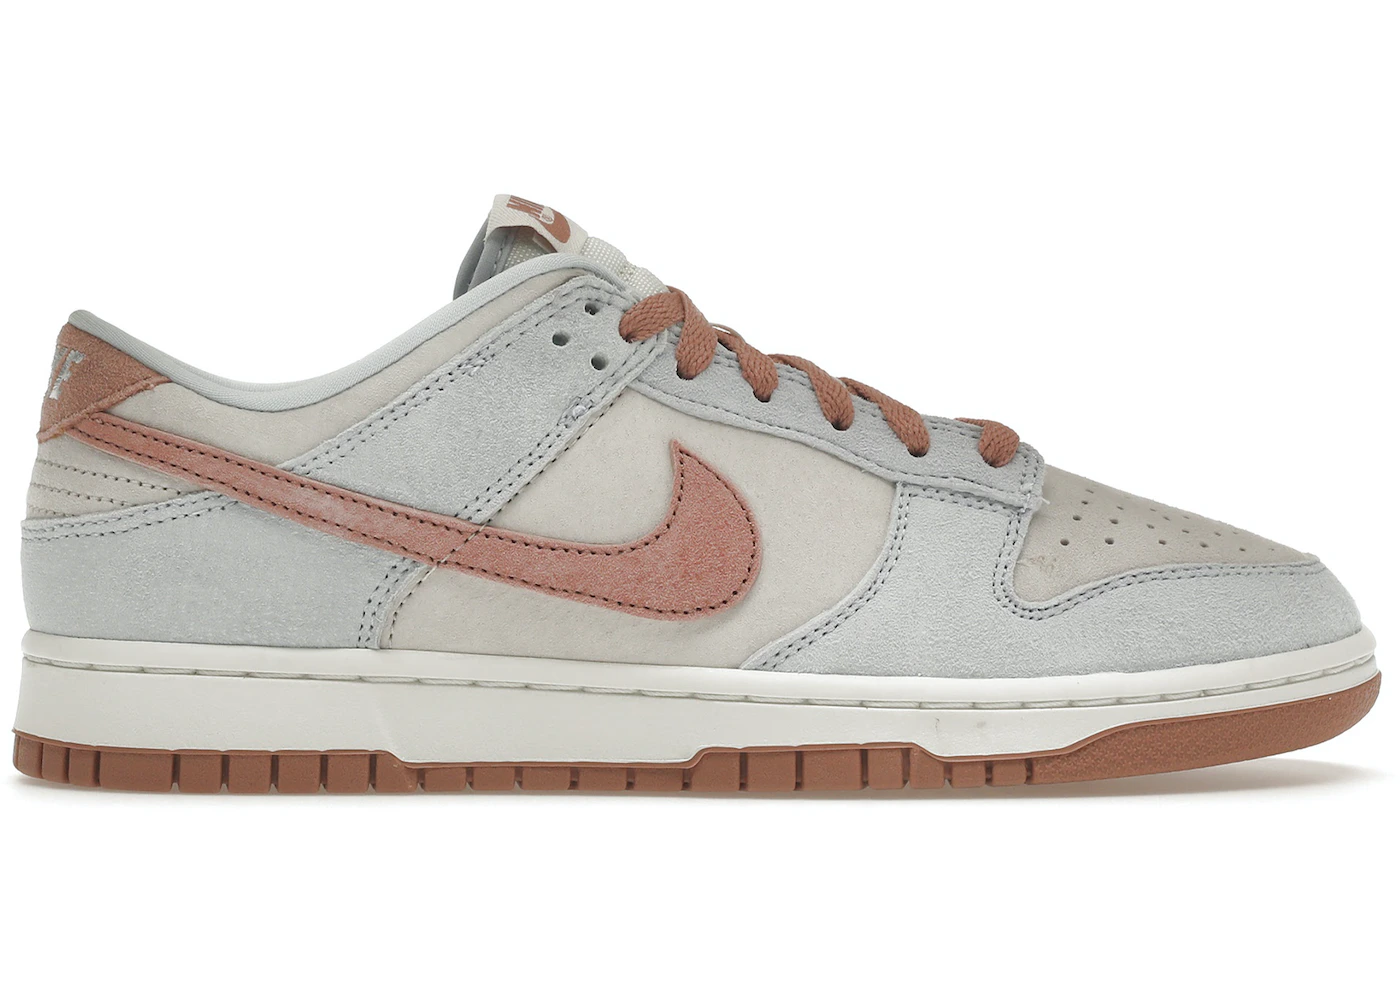 Nike Dunk Low Fossil Rose - DH7577-001 - US